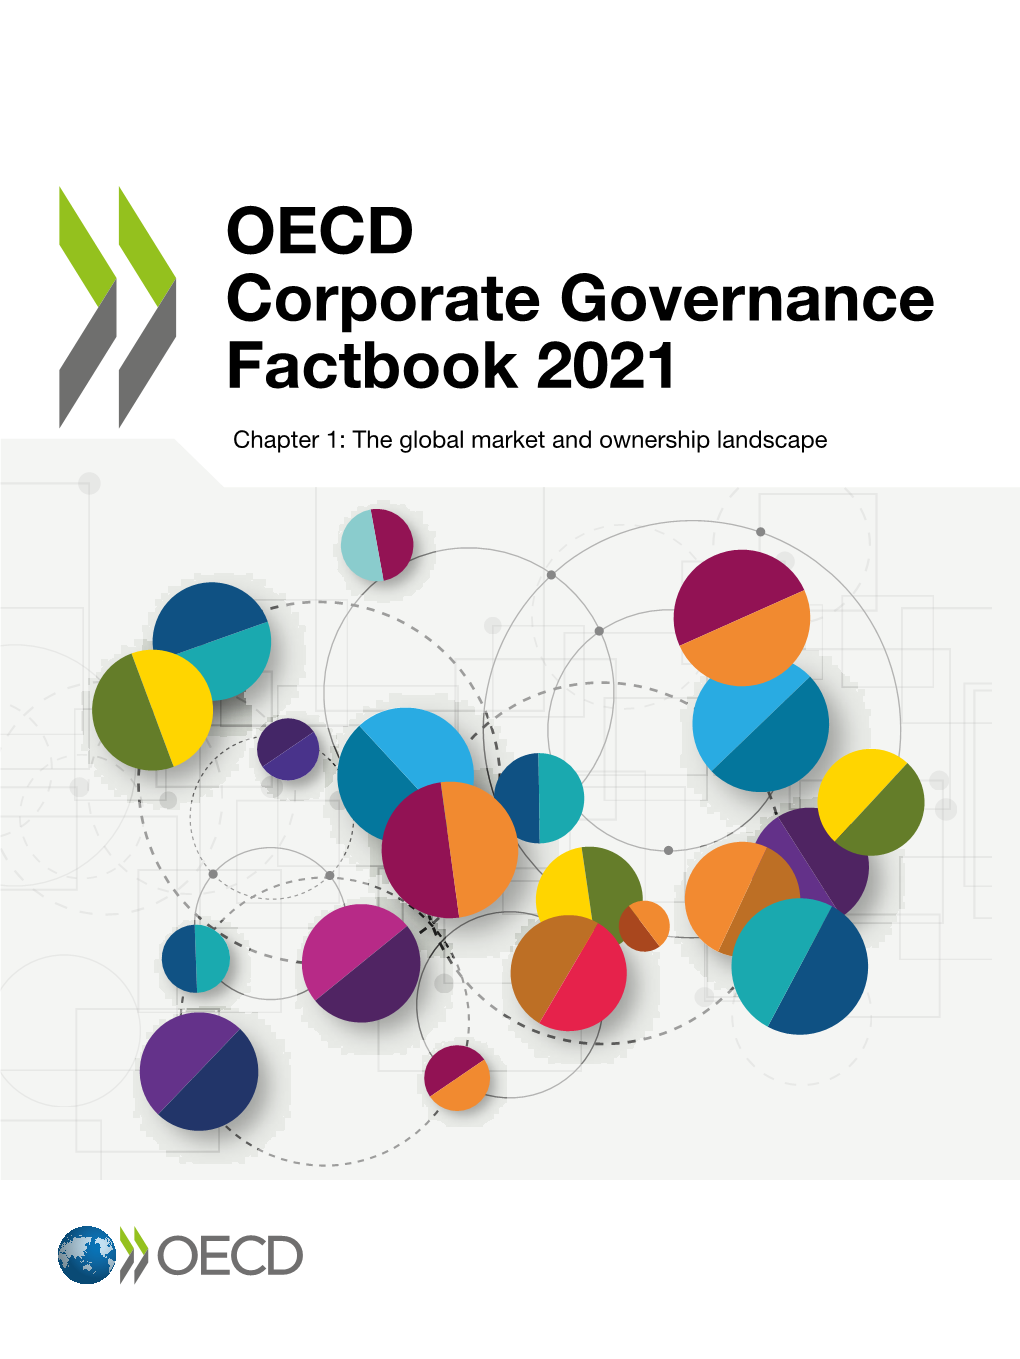 OECD Corporate Governance Factbook 2021 Chapter 1: the Global Market and Ownership Landscape